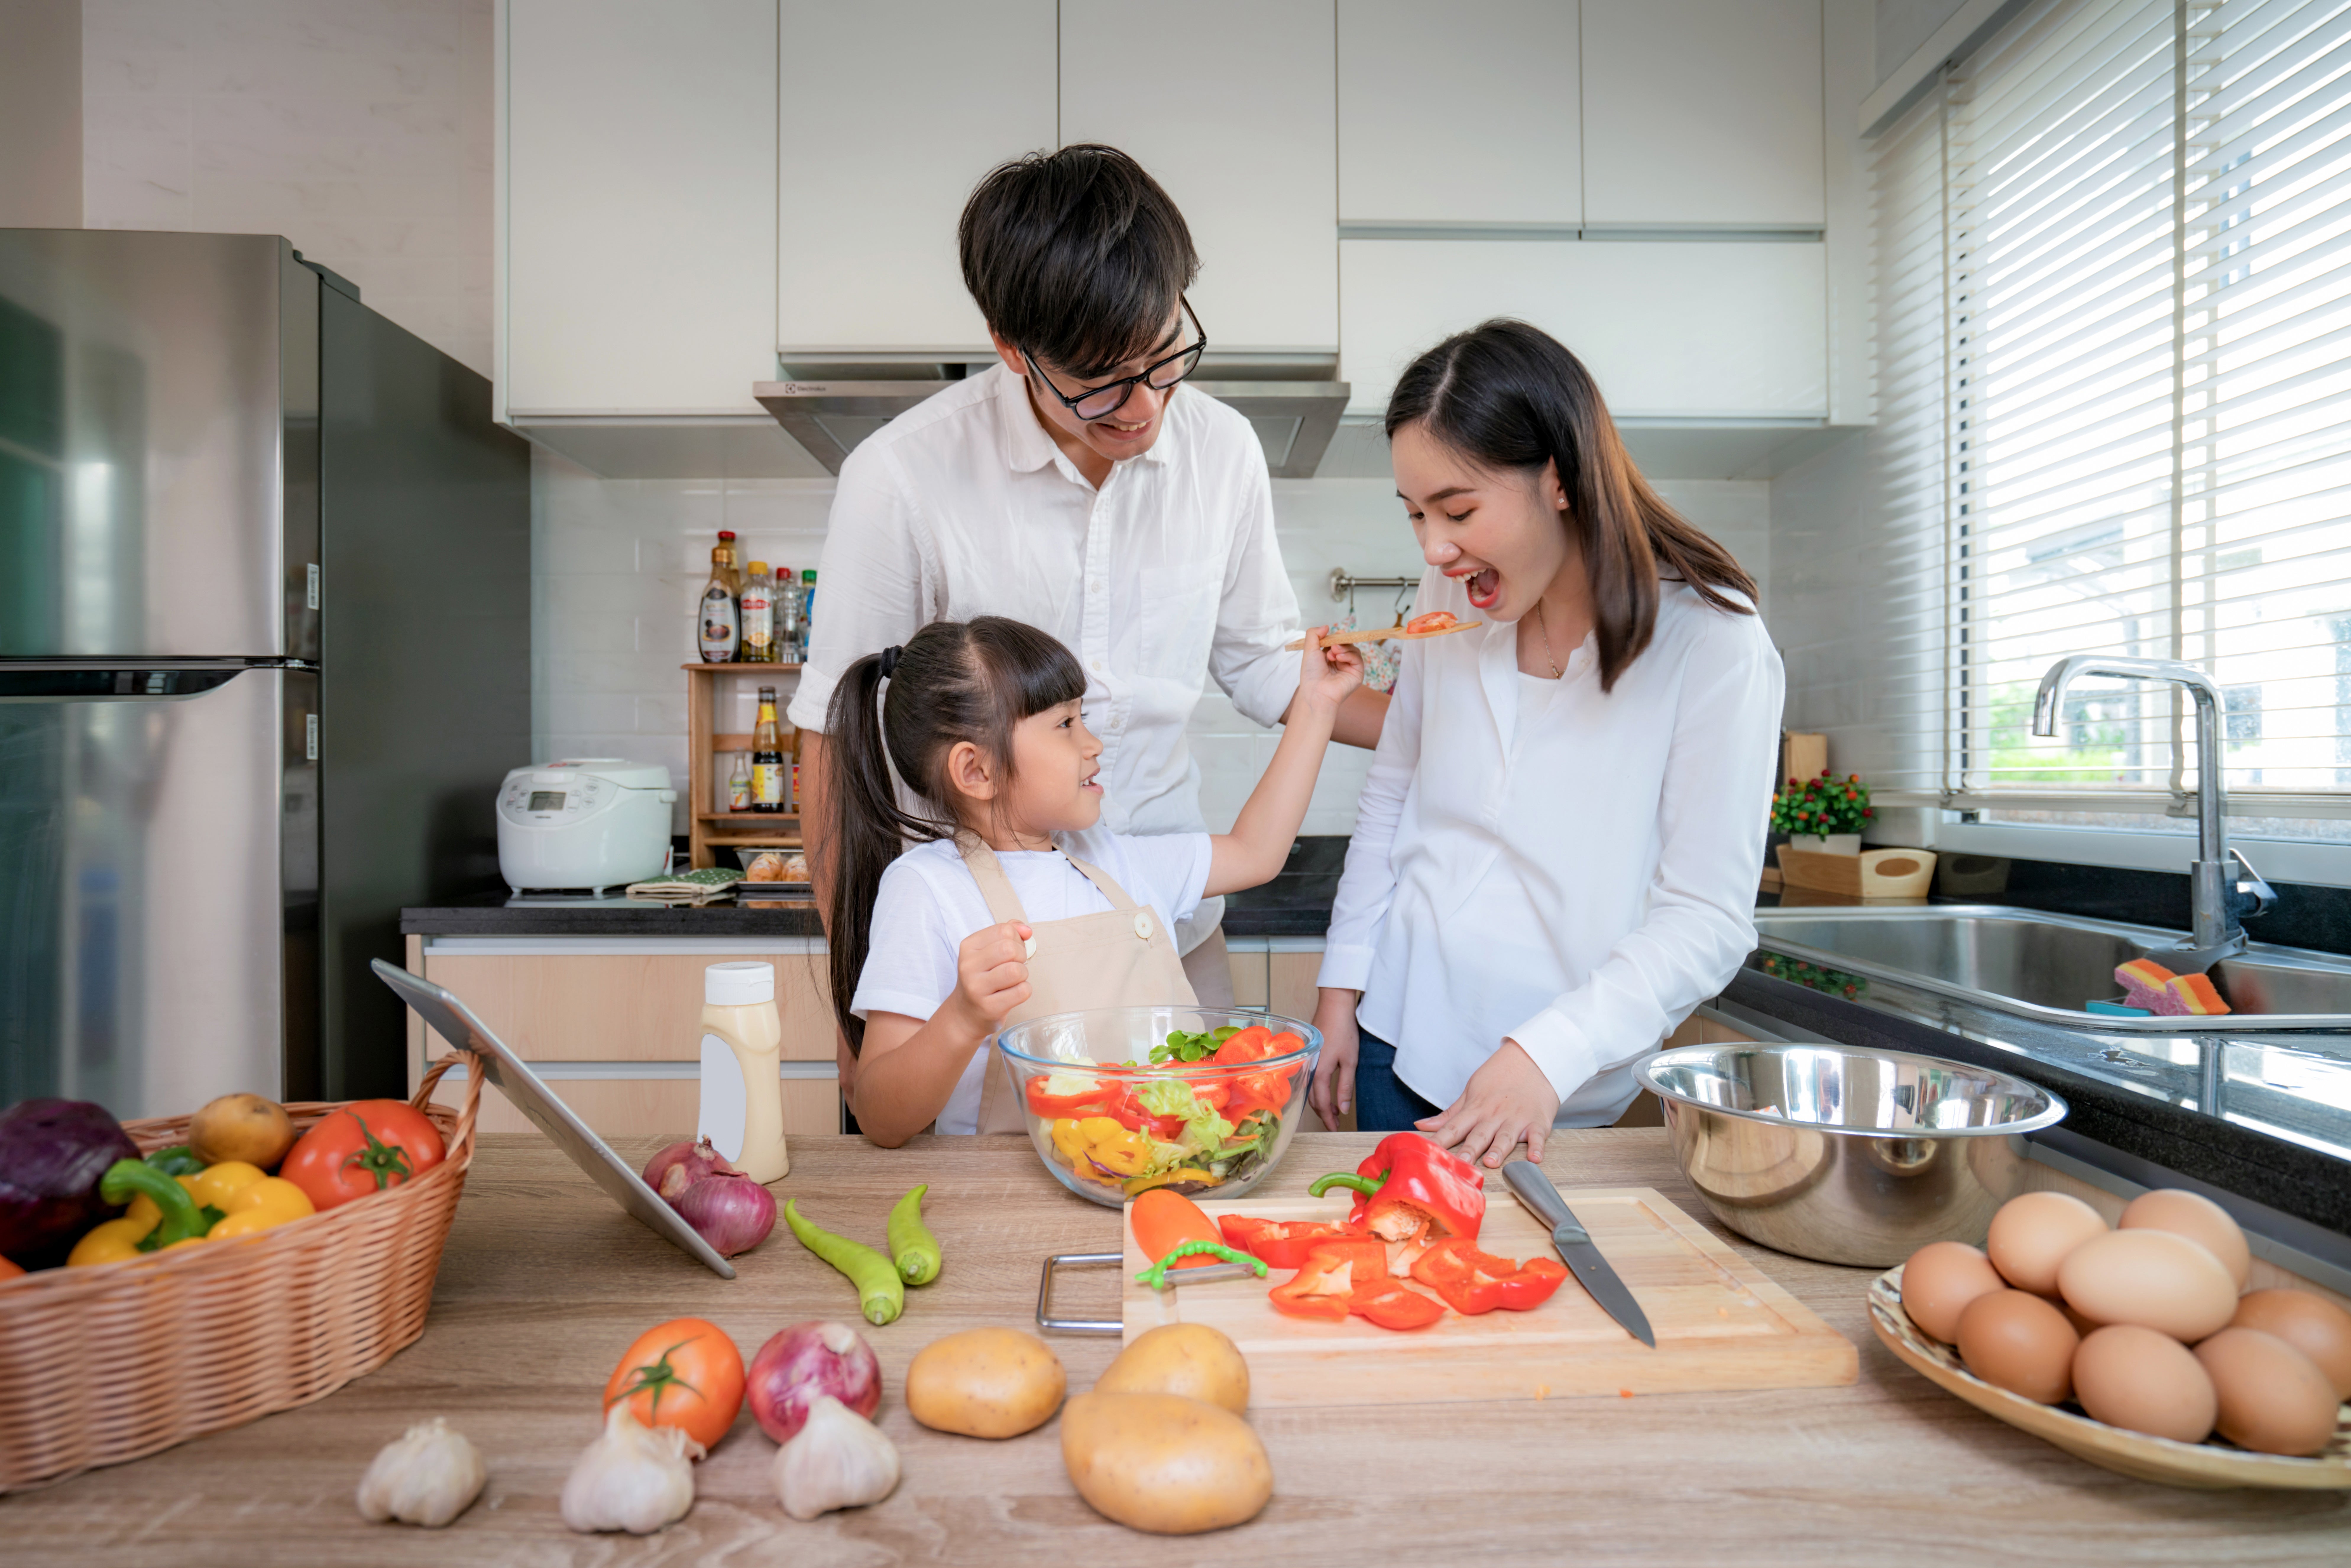 Asian daughters feeding salad to her mother and her father stand